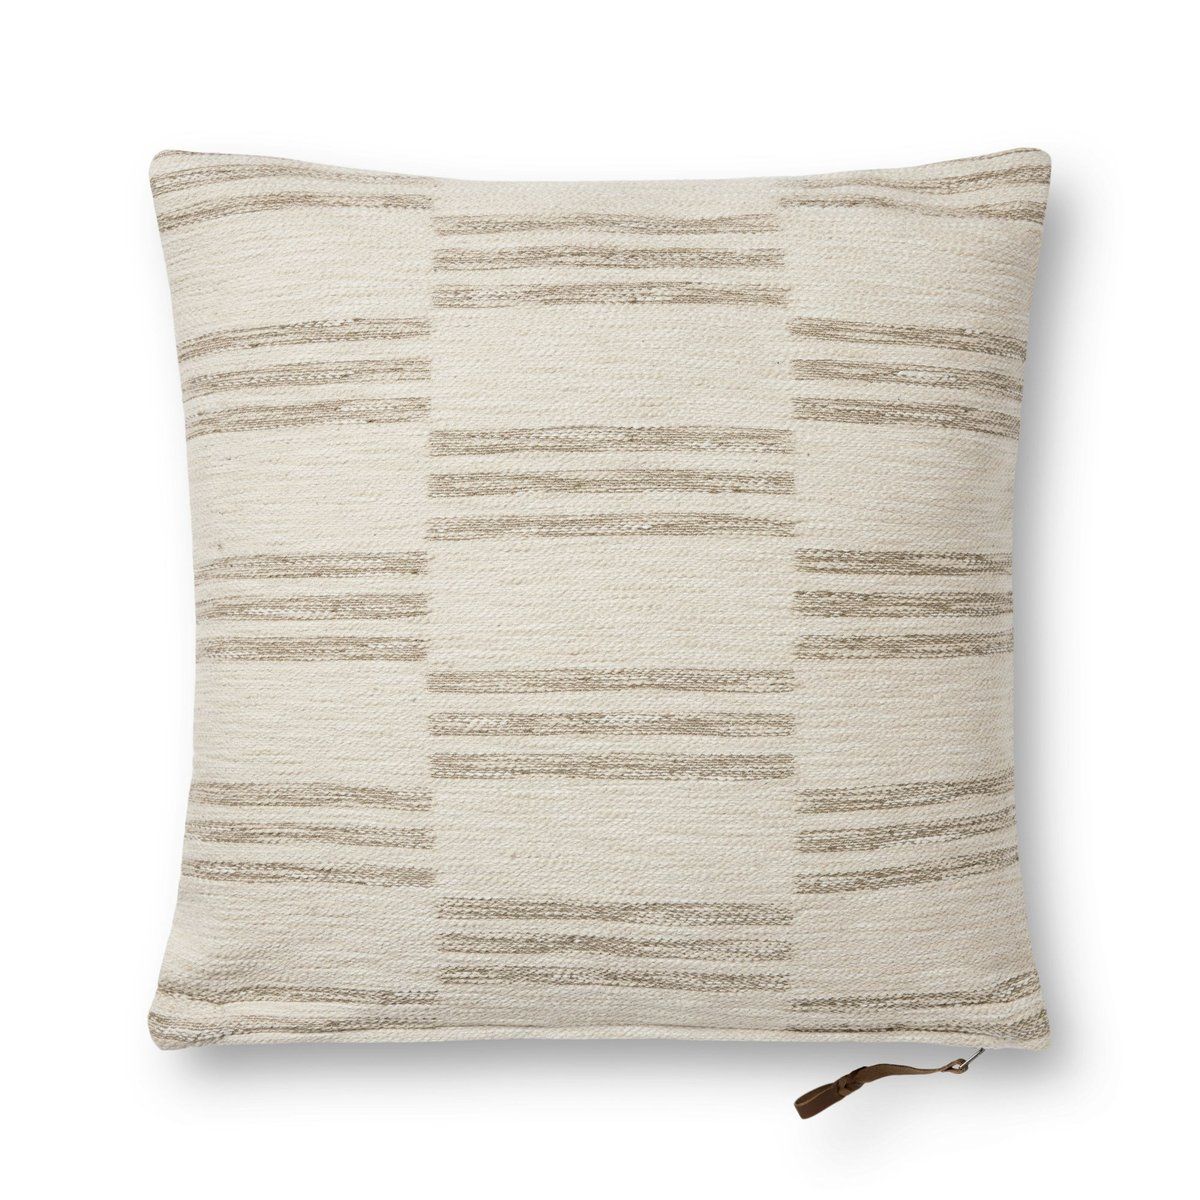 Jay Pillow - PAL-0026 | Rugs Direct